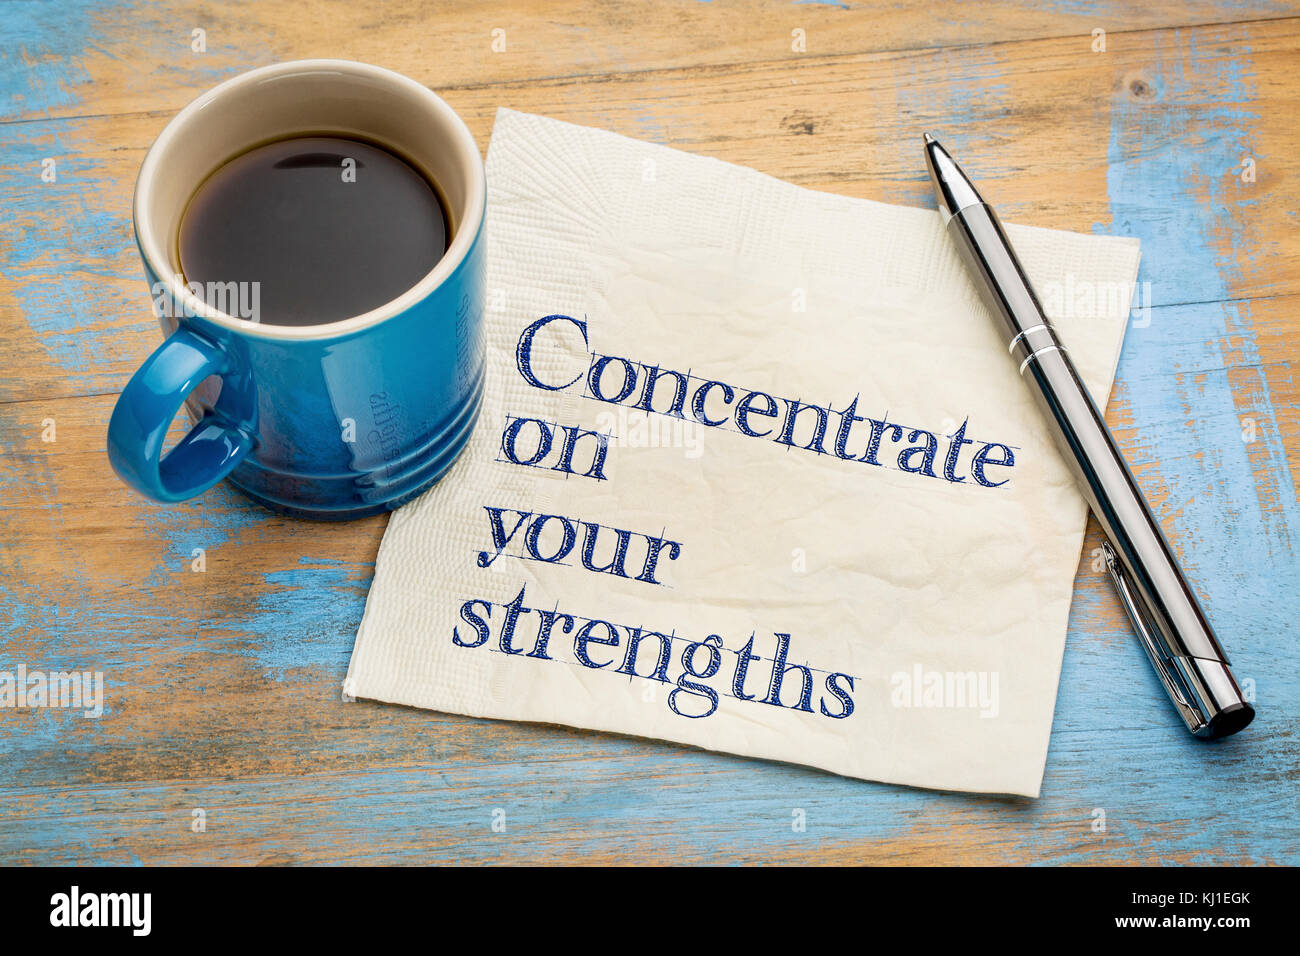 Concentrate on your strengths - handwriting on a napkin with a cup of espresso coffee Stock Photo